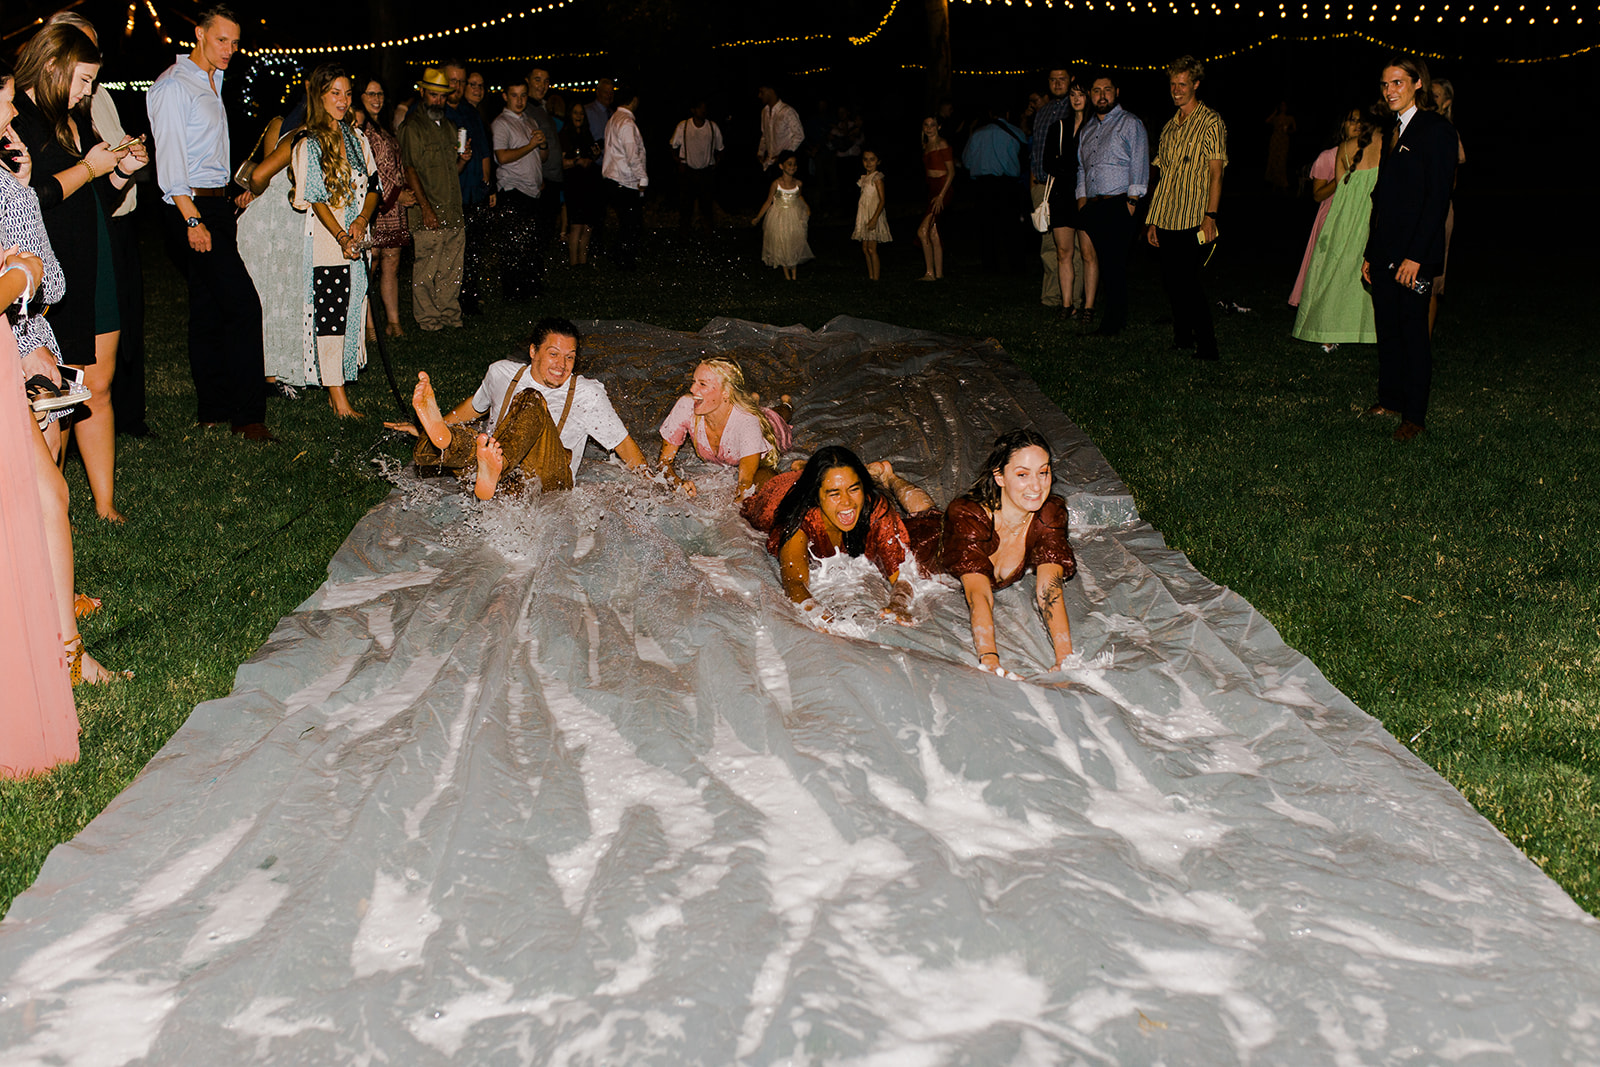 boho- chic couple does a slip 'n slide wedding exit followed by the bridal party and guests